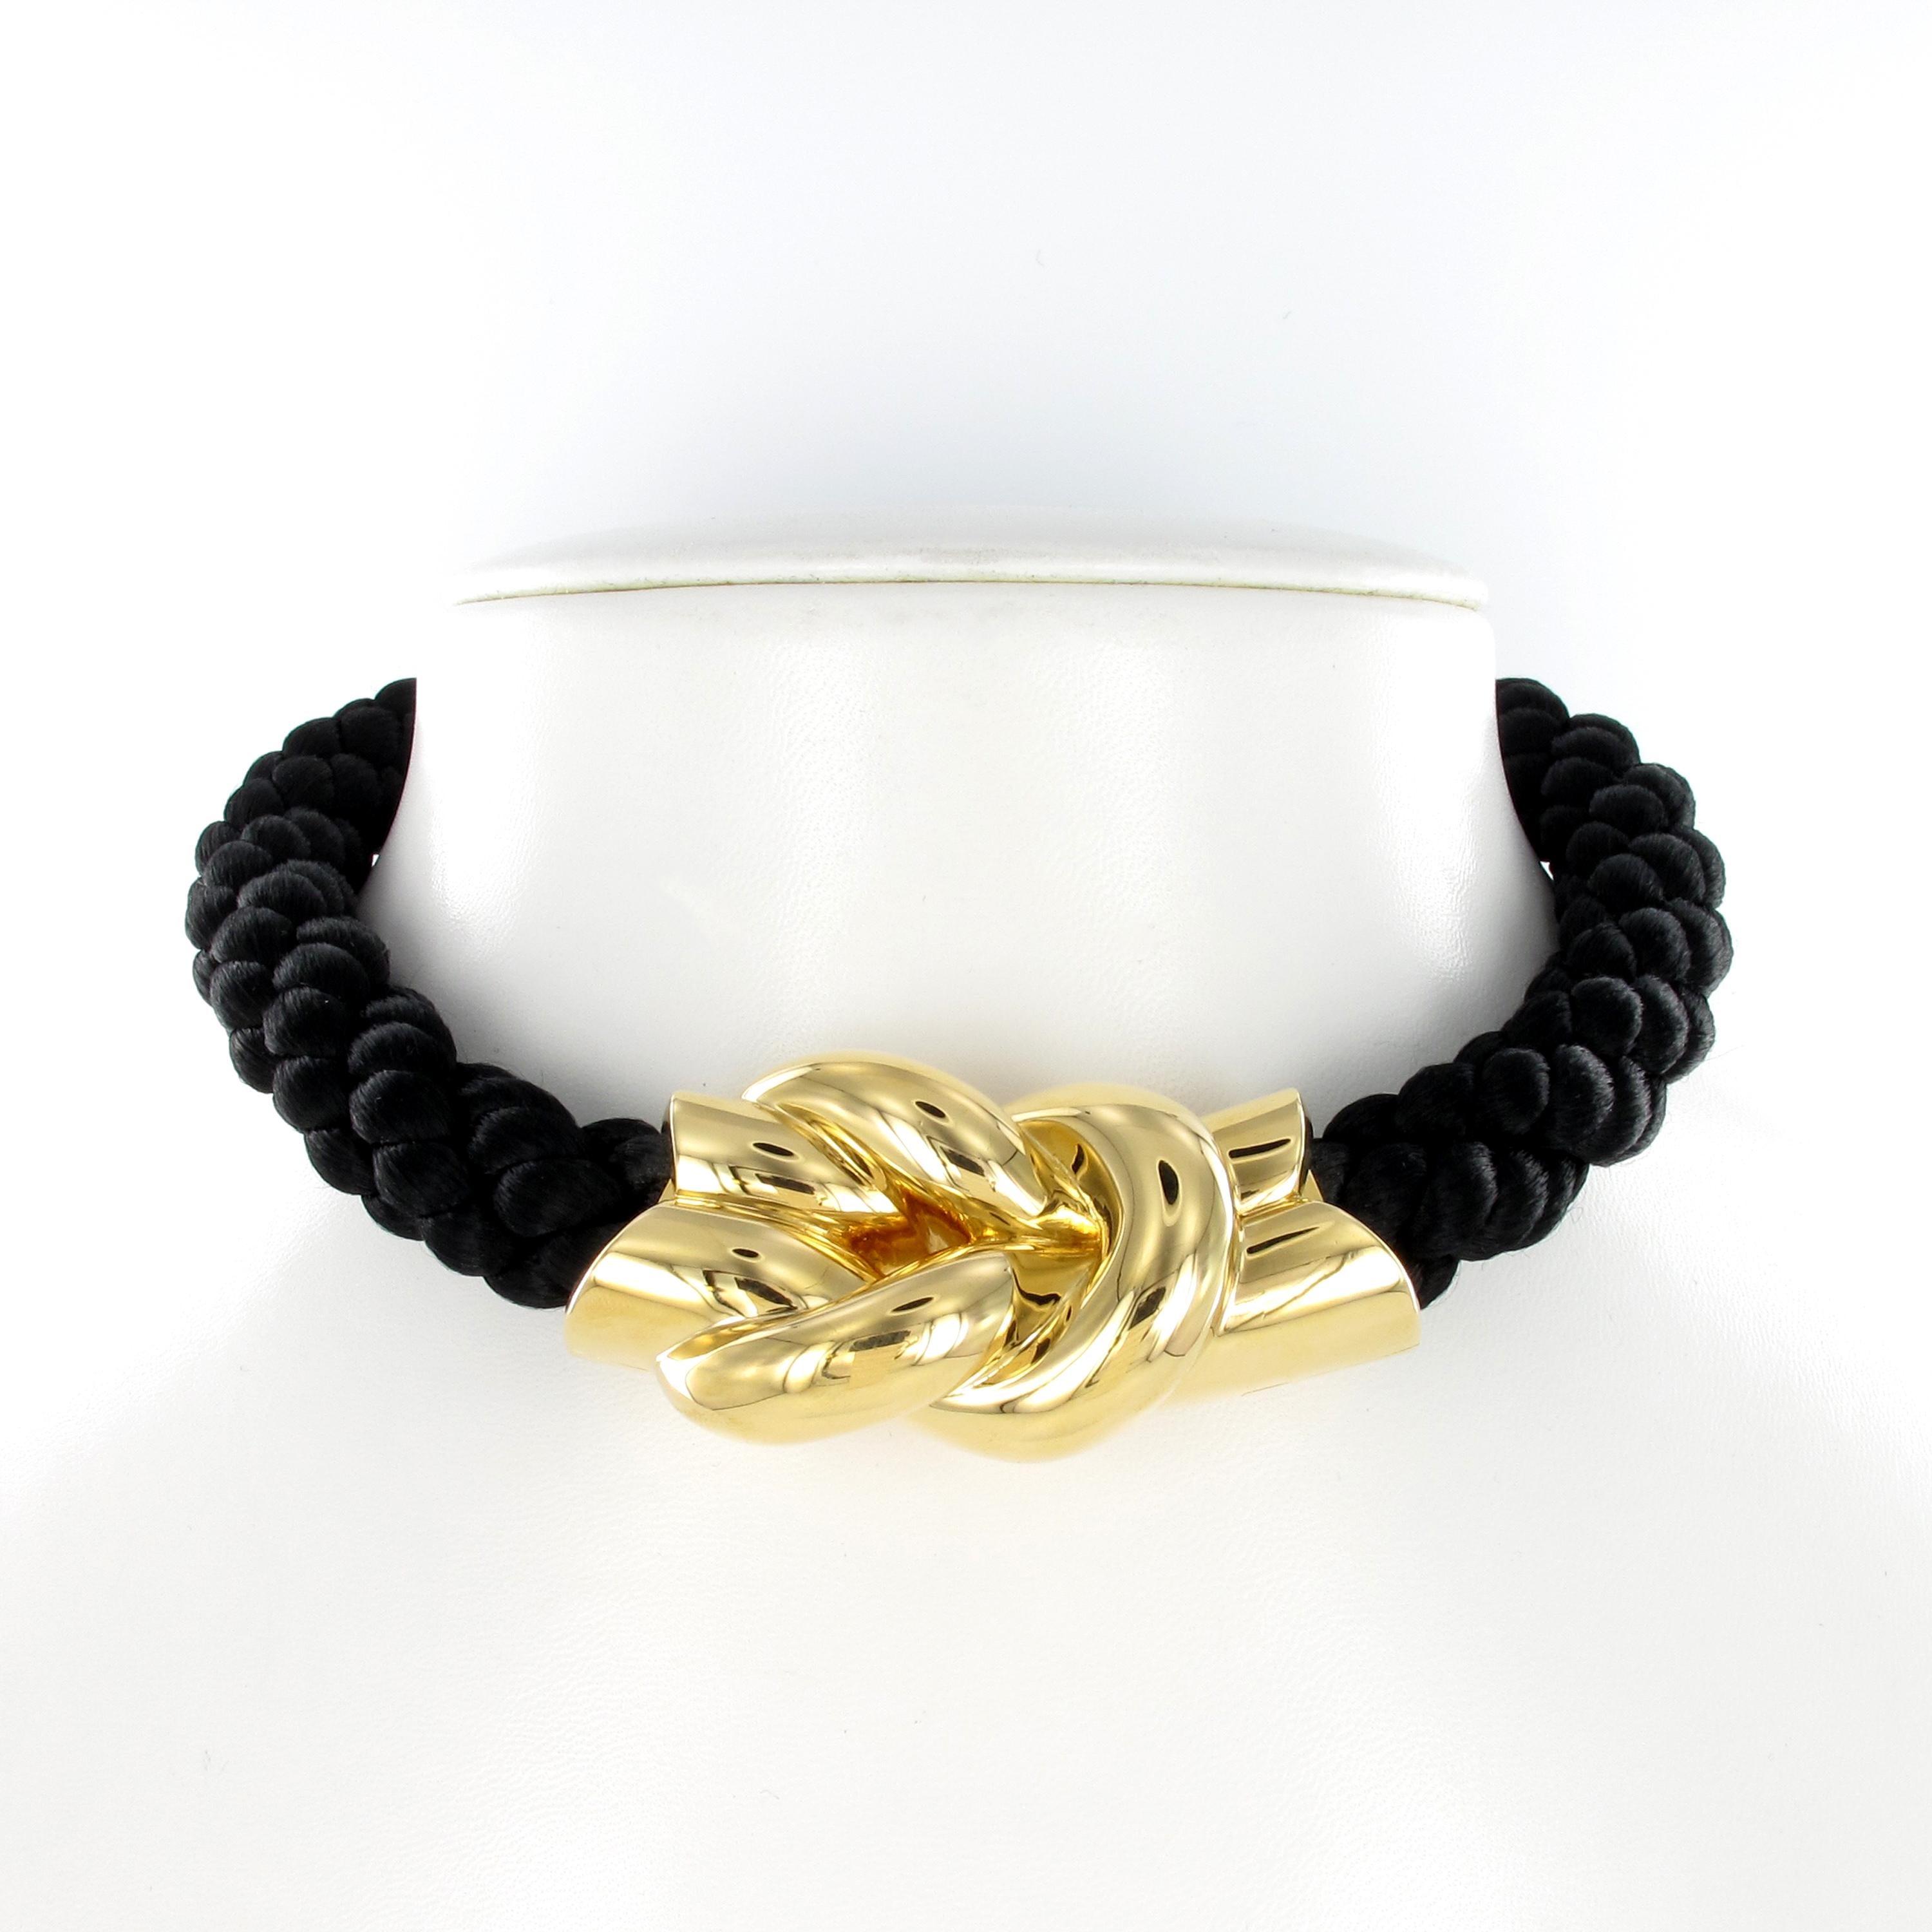 This choker by Gubelin features a bold square (reef) knot in 18 karat yellow gold. The necklace consists of artfully plaited black ropes.

Length: 40 cm / 15.74 inches
Signed Gubelin and hallmarked 750 for 18 karat gold.
